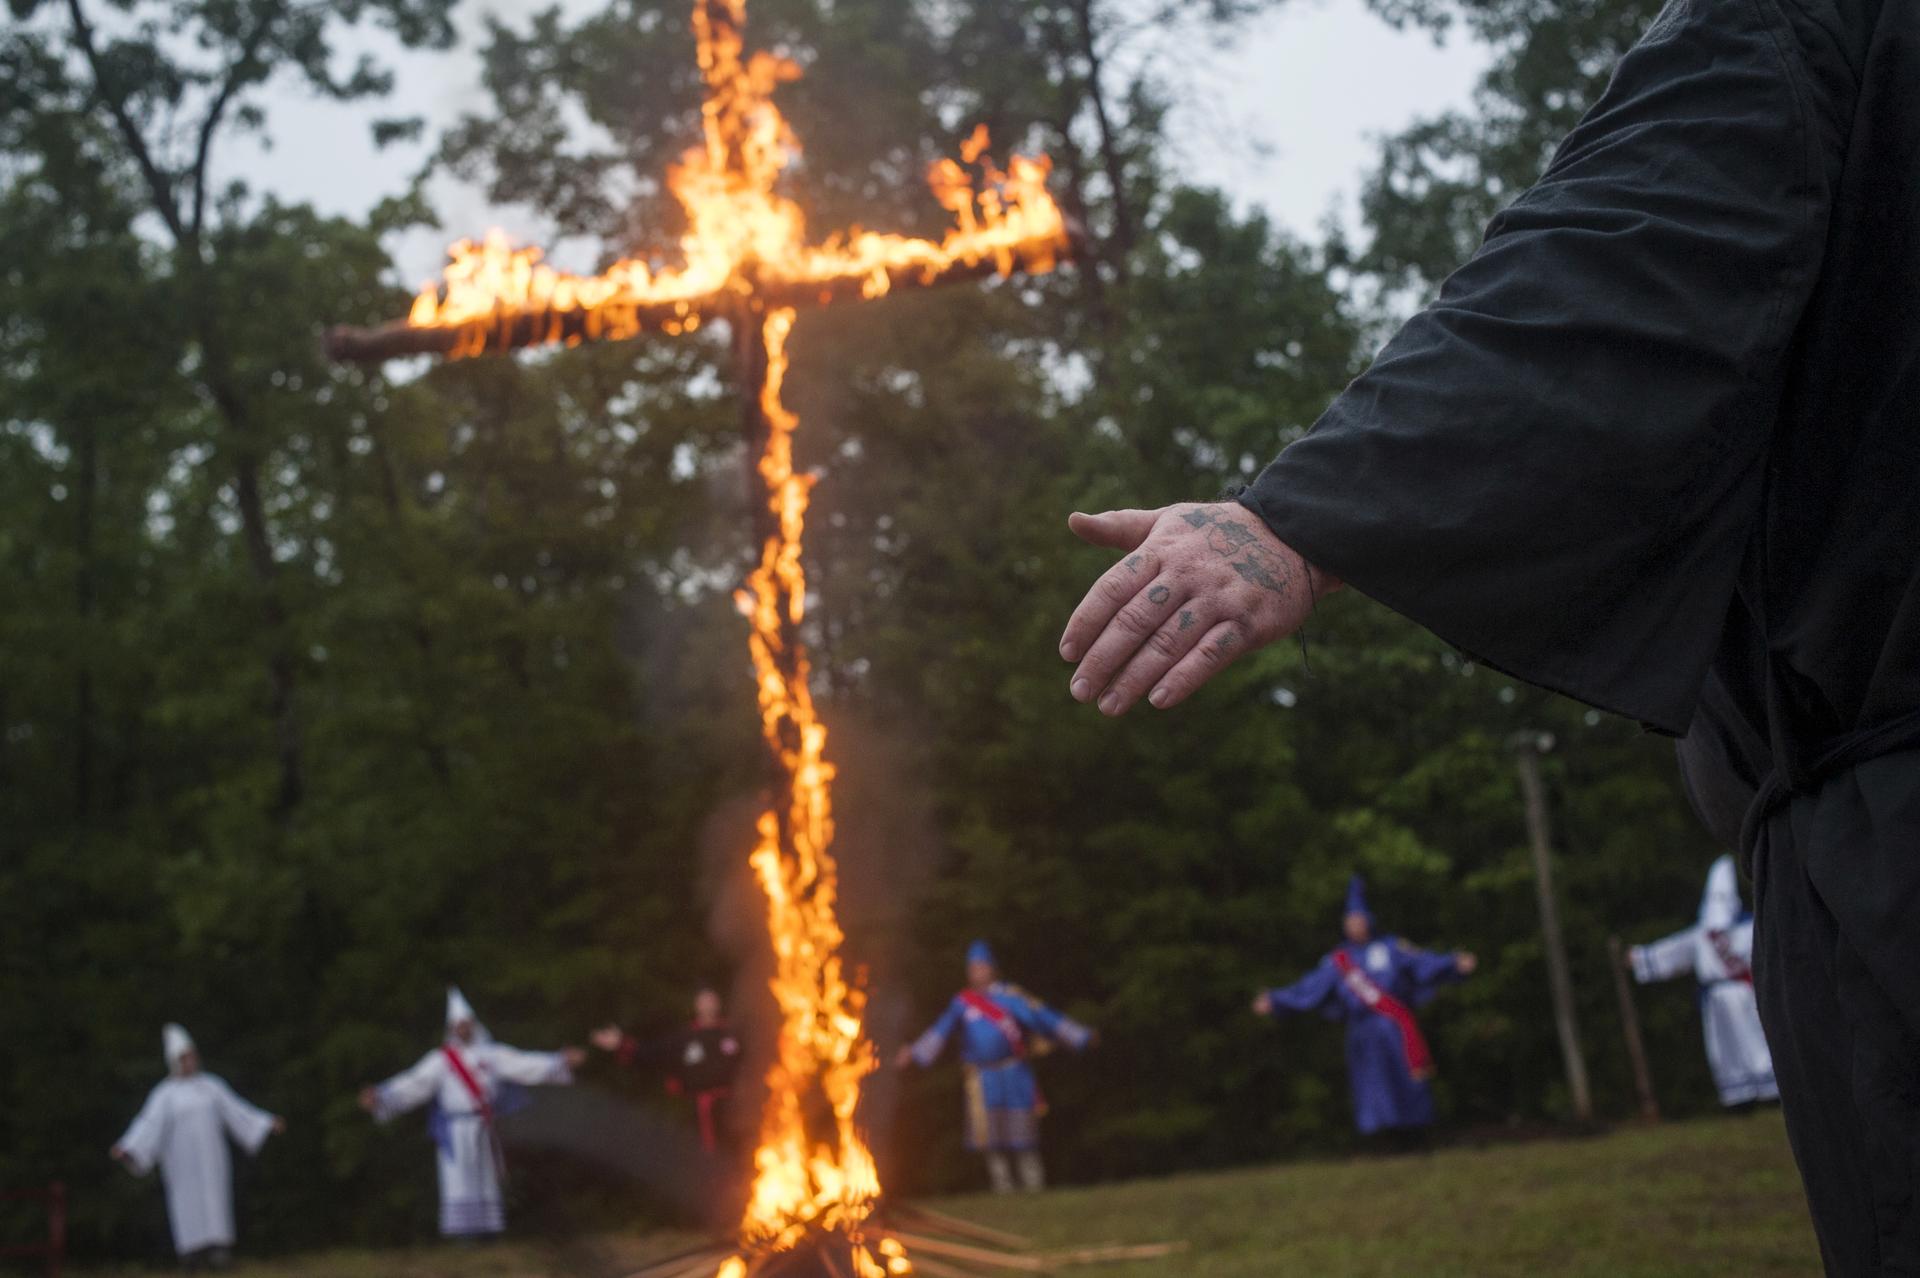 Members of the Nordic Order Knights and the Rebel Brigade Knights, groups that both claim affiliation with the Ku Klux Klan, in a cross lighting ceremony on a fellow member's property in Henry County, Virginia, August 9, 2014.